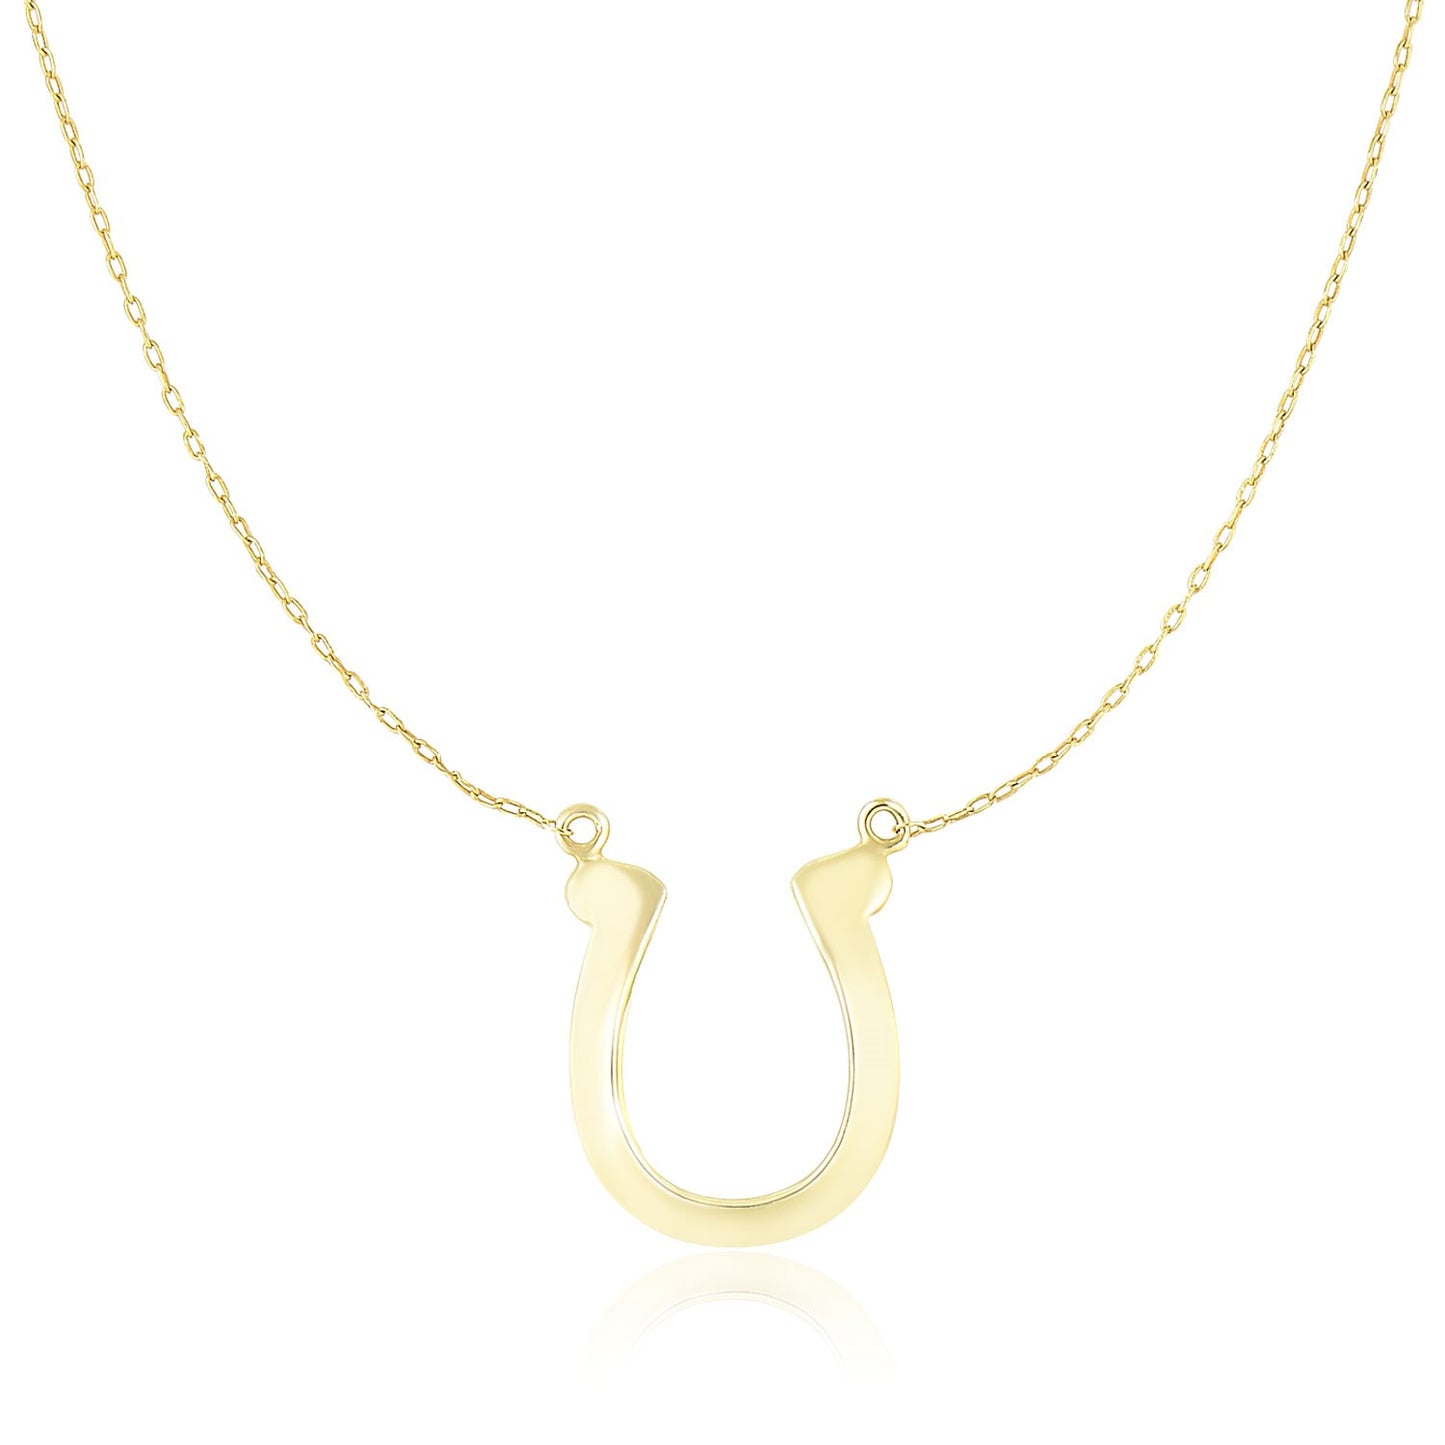 14k Yellow Gold Chain Necklace with Polished Horseshoe Charm